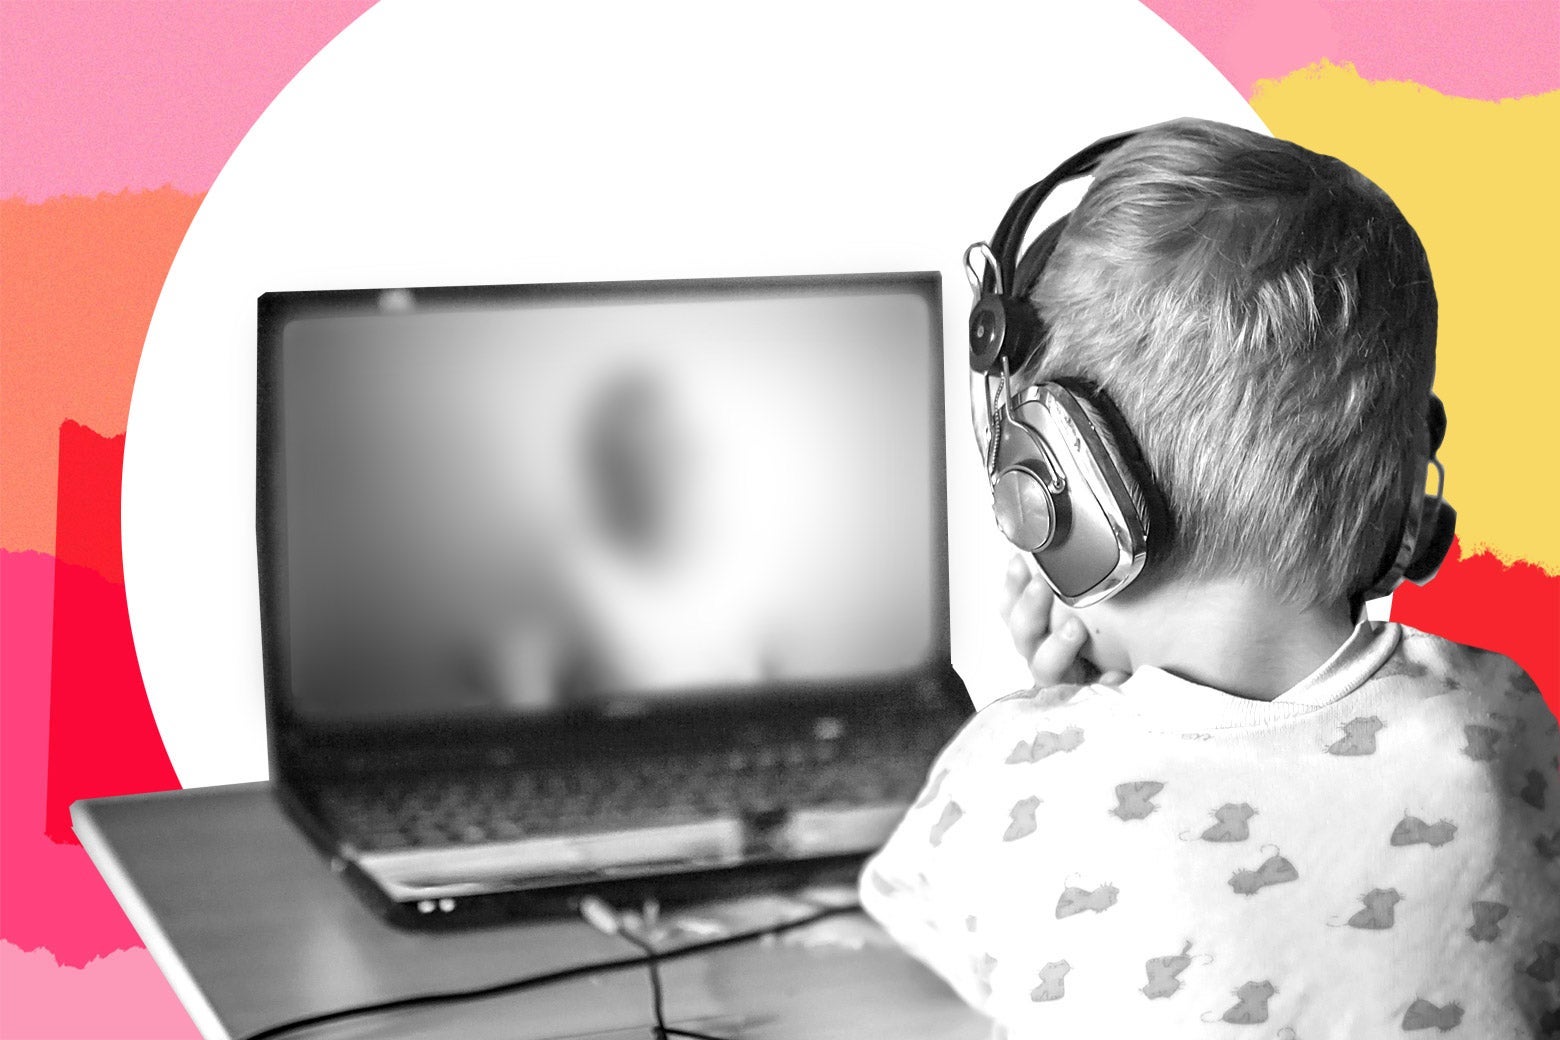 Zoomed Porn Real Boy - Online school causing introduction to porn: parenting advice from Care and  Feeding.